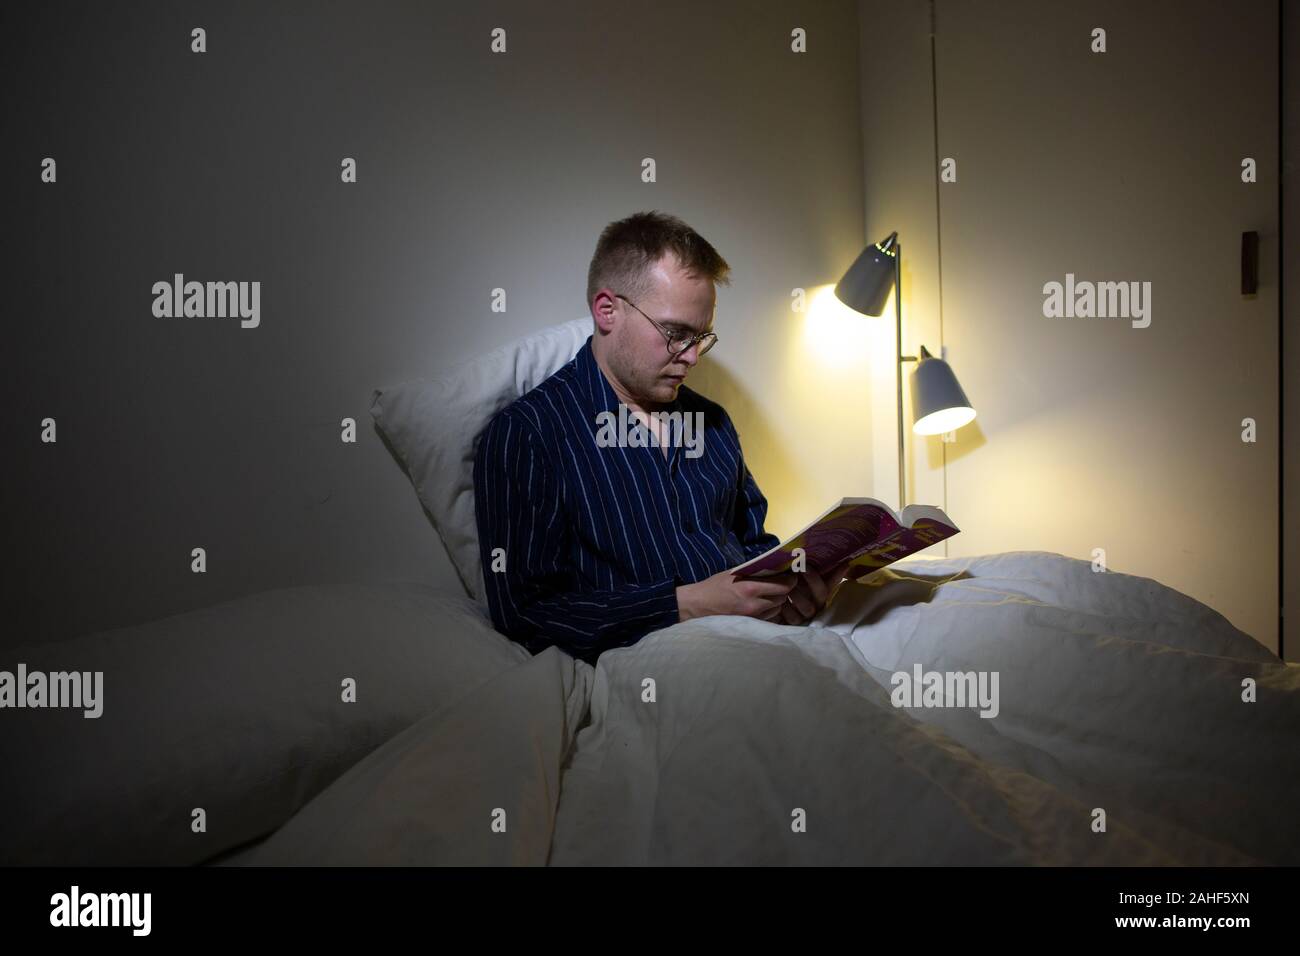 Man in his thirties engaging in 'segmented sleep'. Waking up for an hour in the night has been argued to be humans natural state. Stock Photo